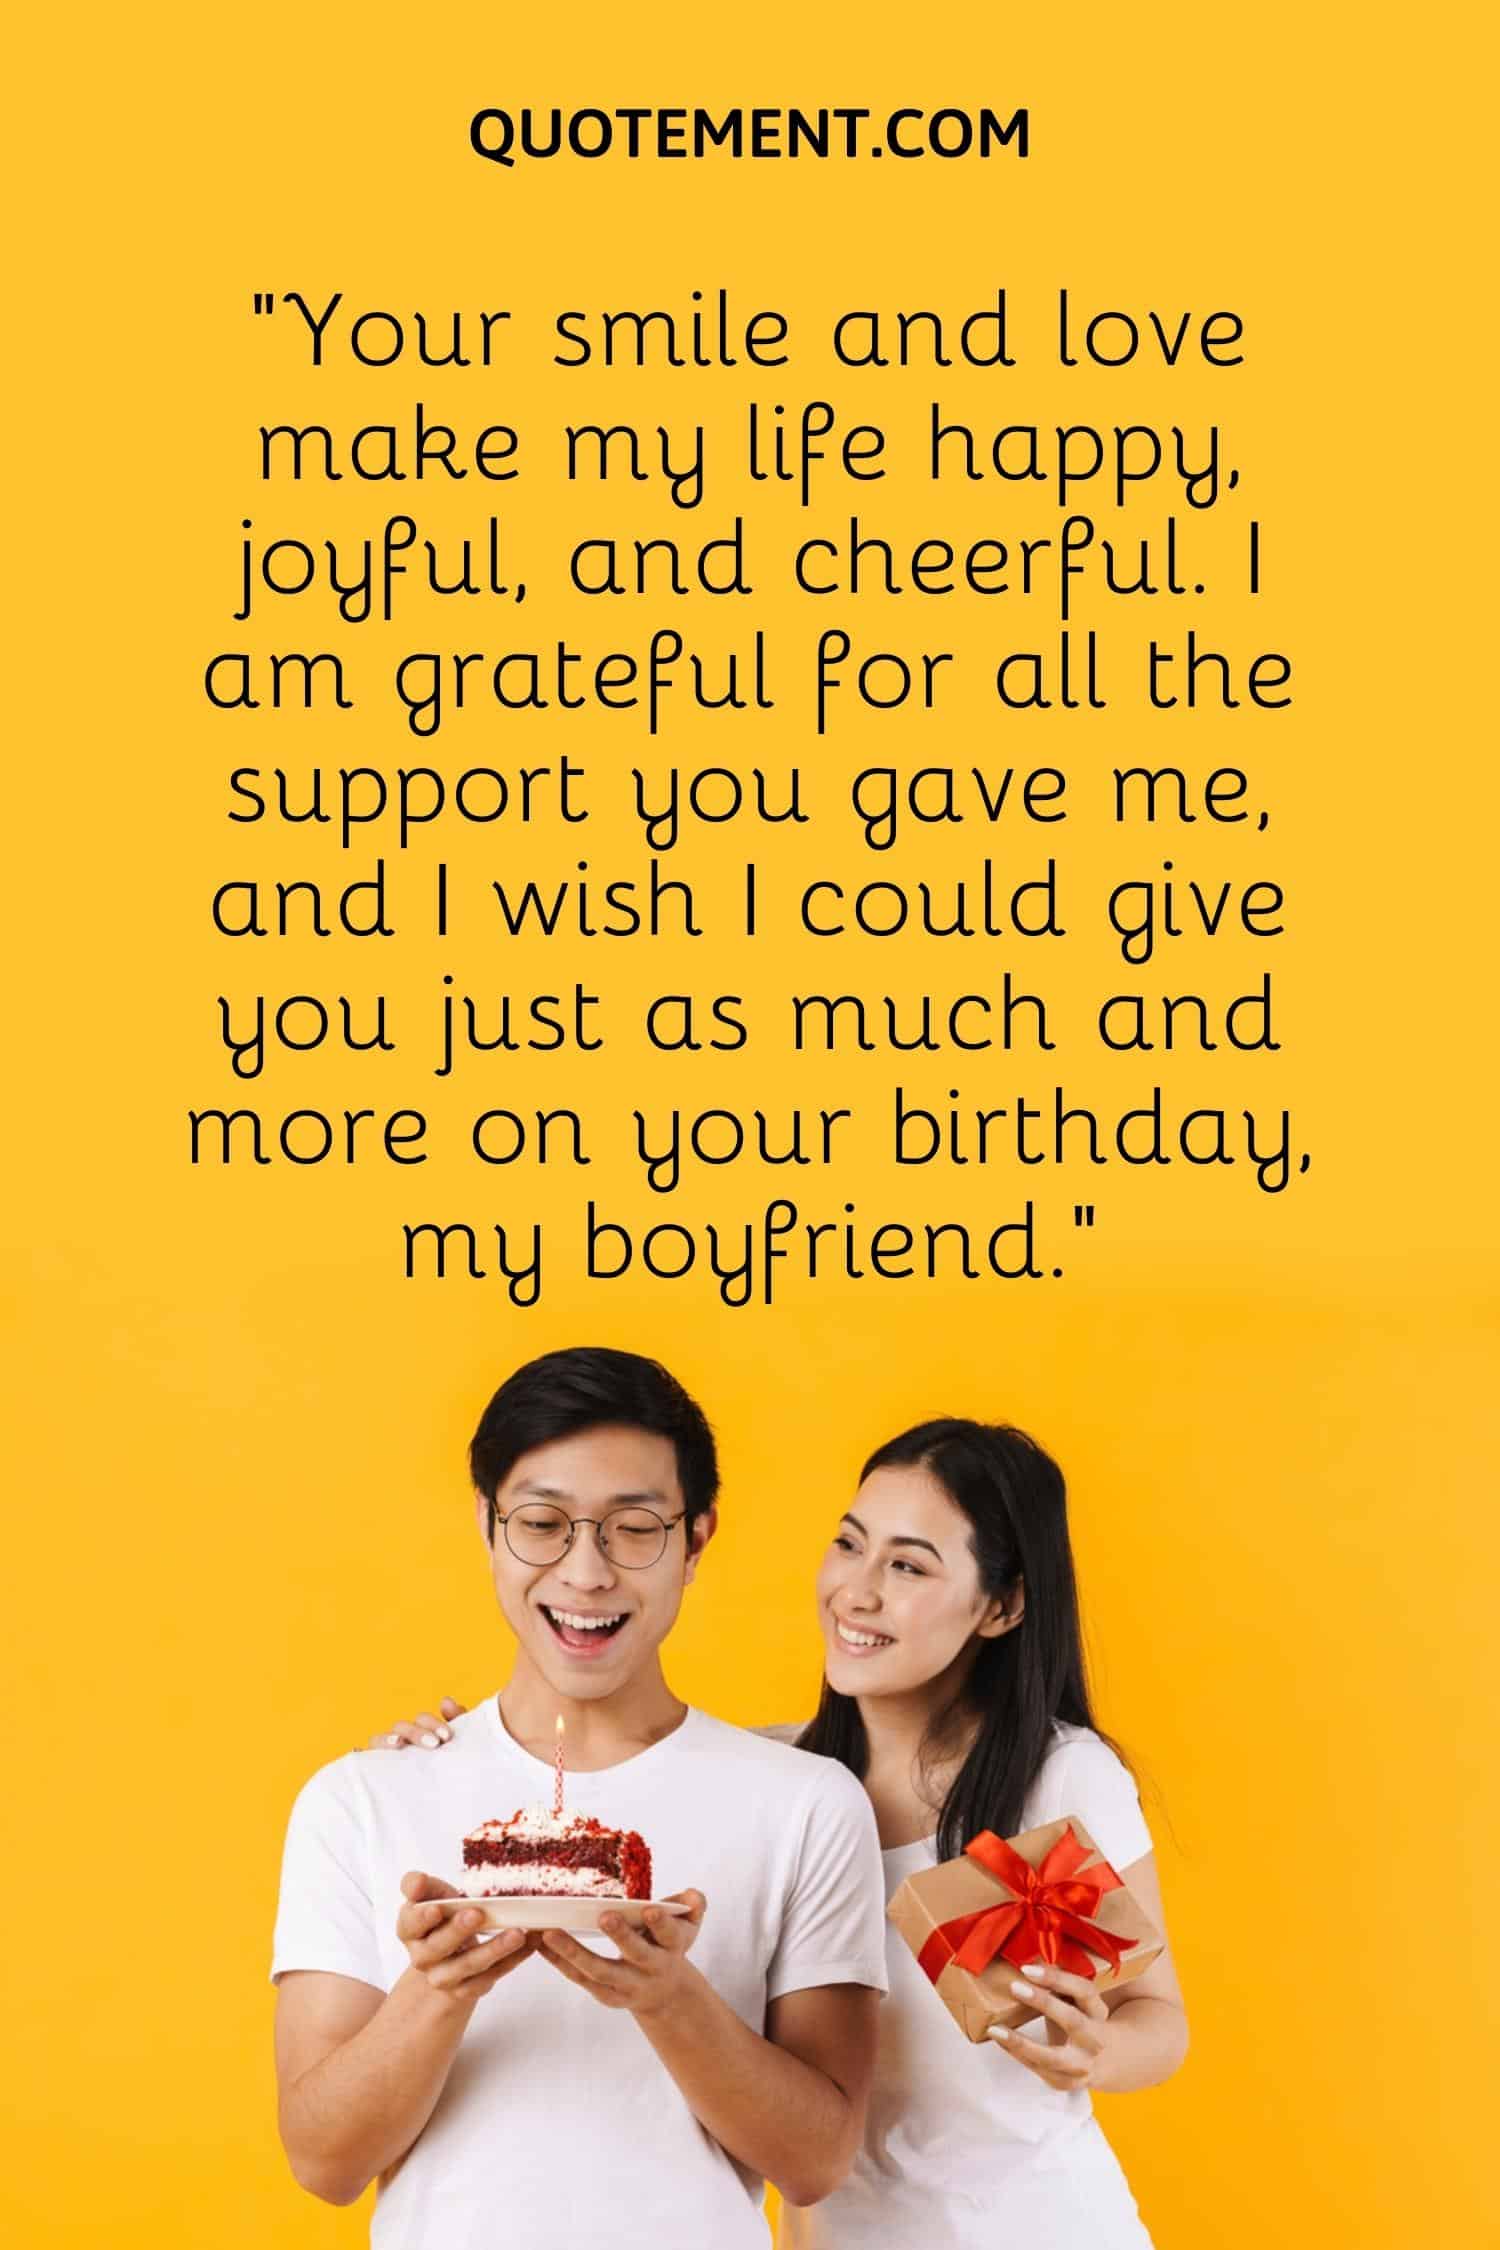 110 Sweet And Emotional Birthday Wishes For Boyfriend